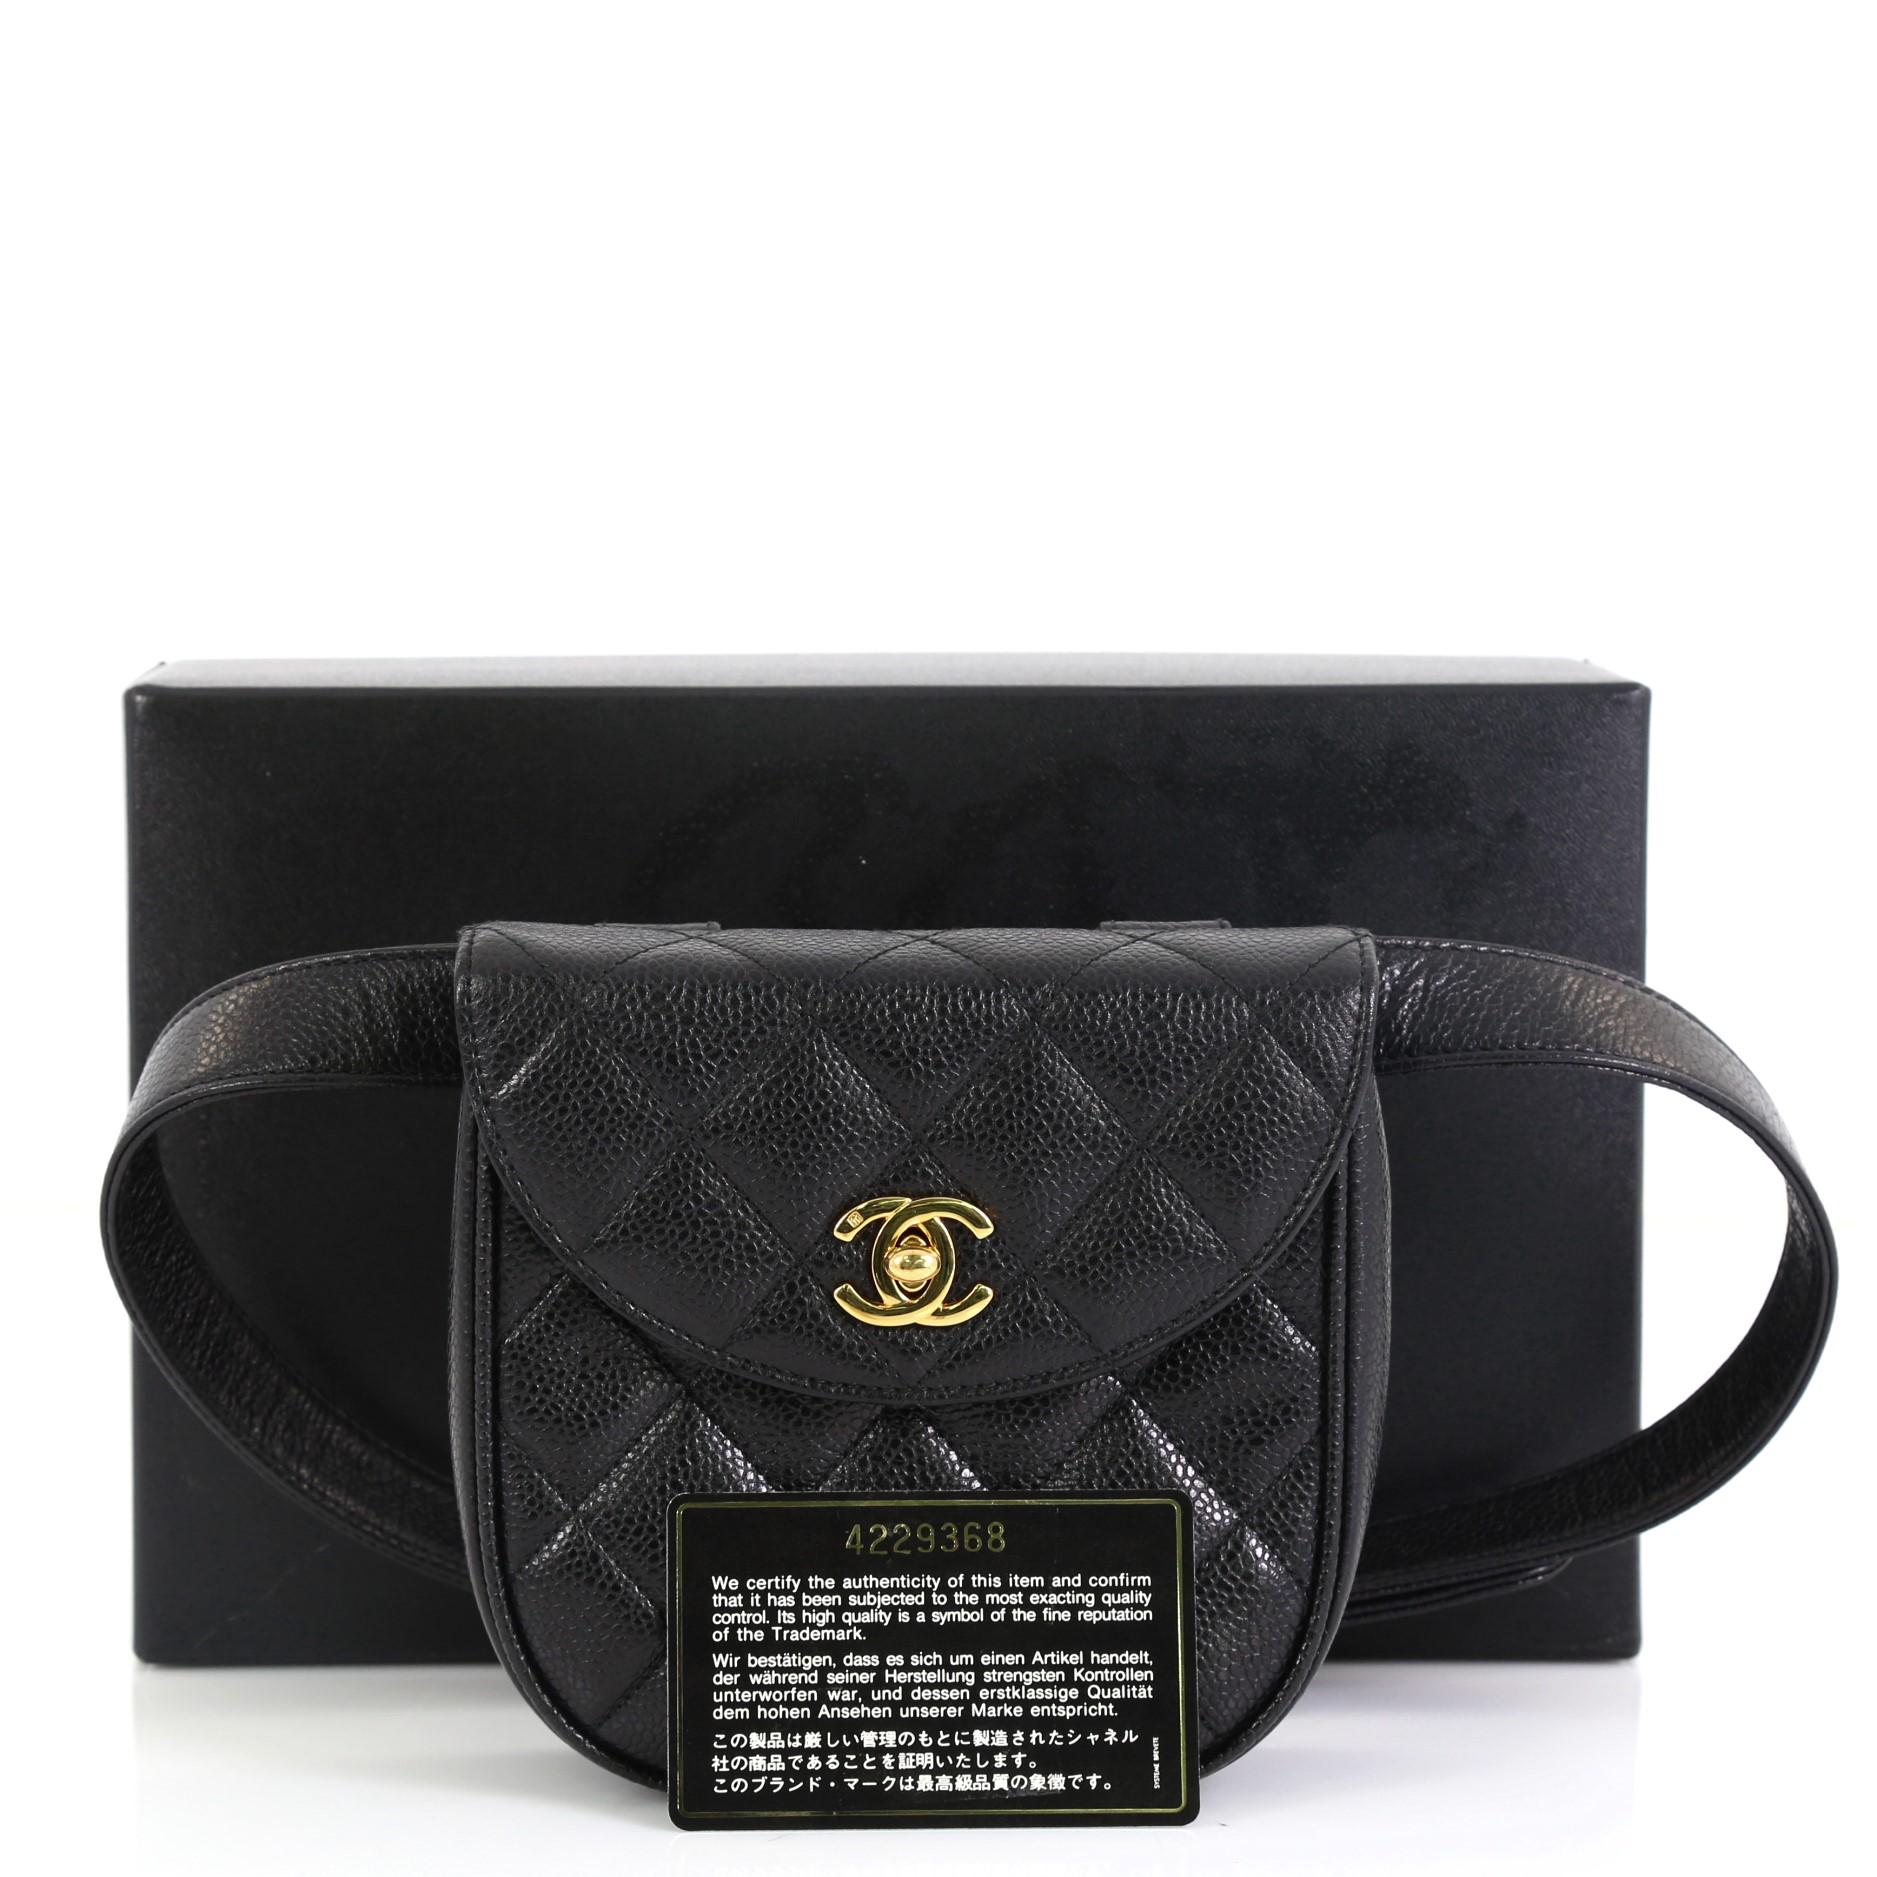 This Chanel Vintage Flap Belt Bag Quilted Caviar Mini, crafted in black quilted caviar leather, features an adjustable belt strap, CC turn-lock closure and gold-tone hardware. Its turn-lock closure opens to a black leather interior with zip pocket.